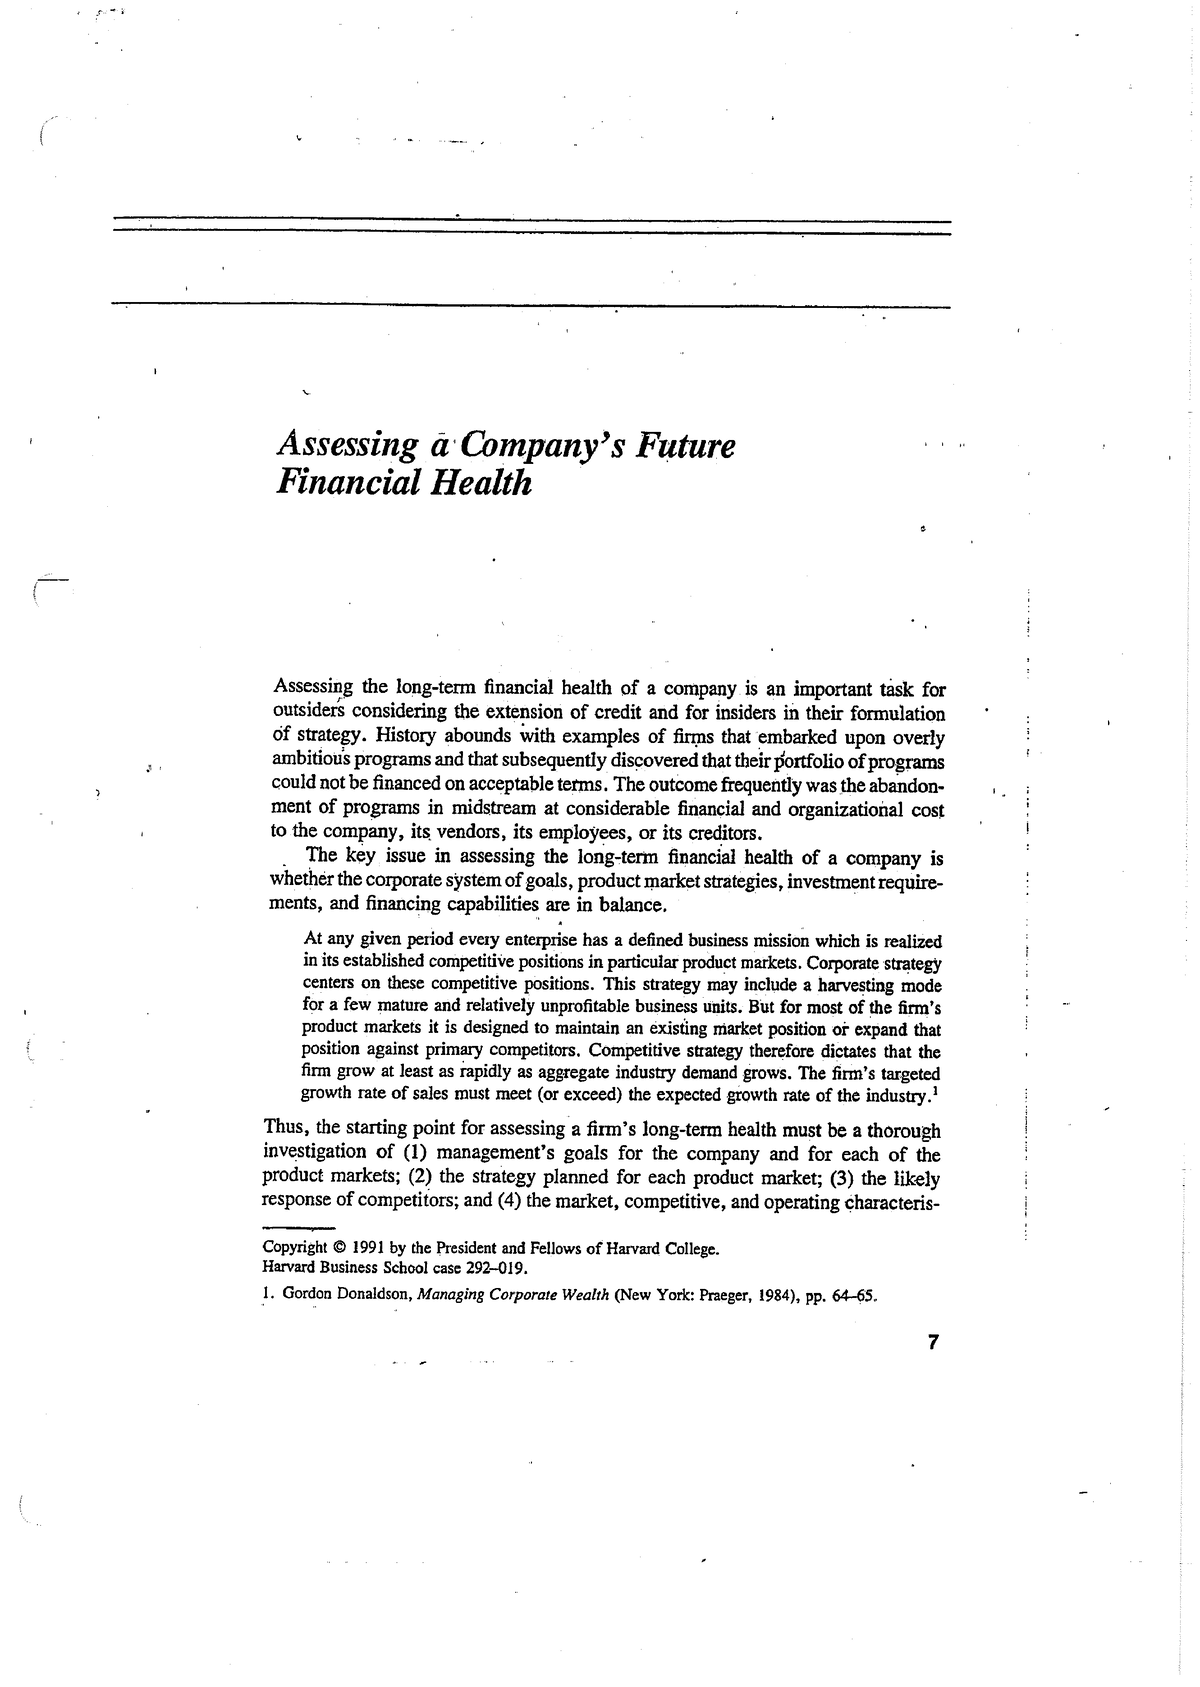 case study on evaluating a company's future financial health